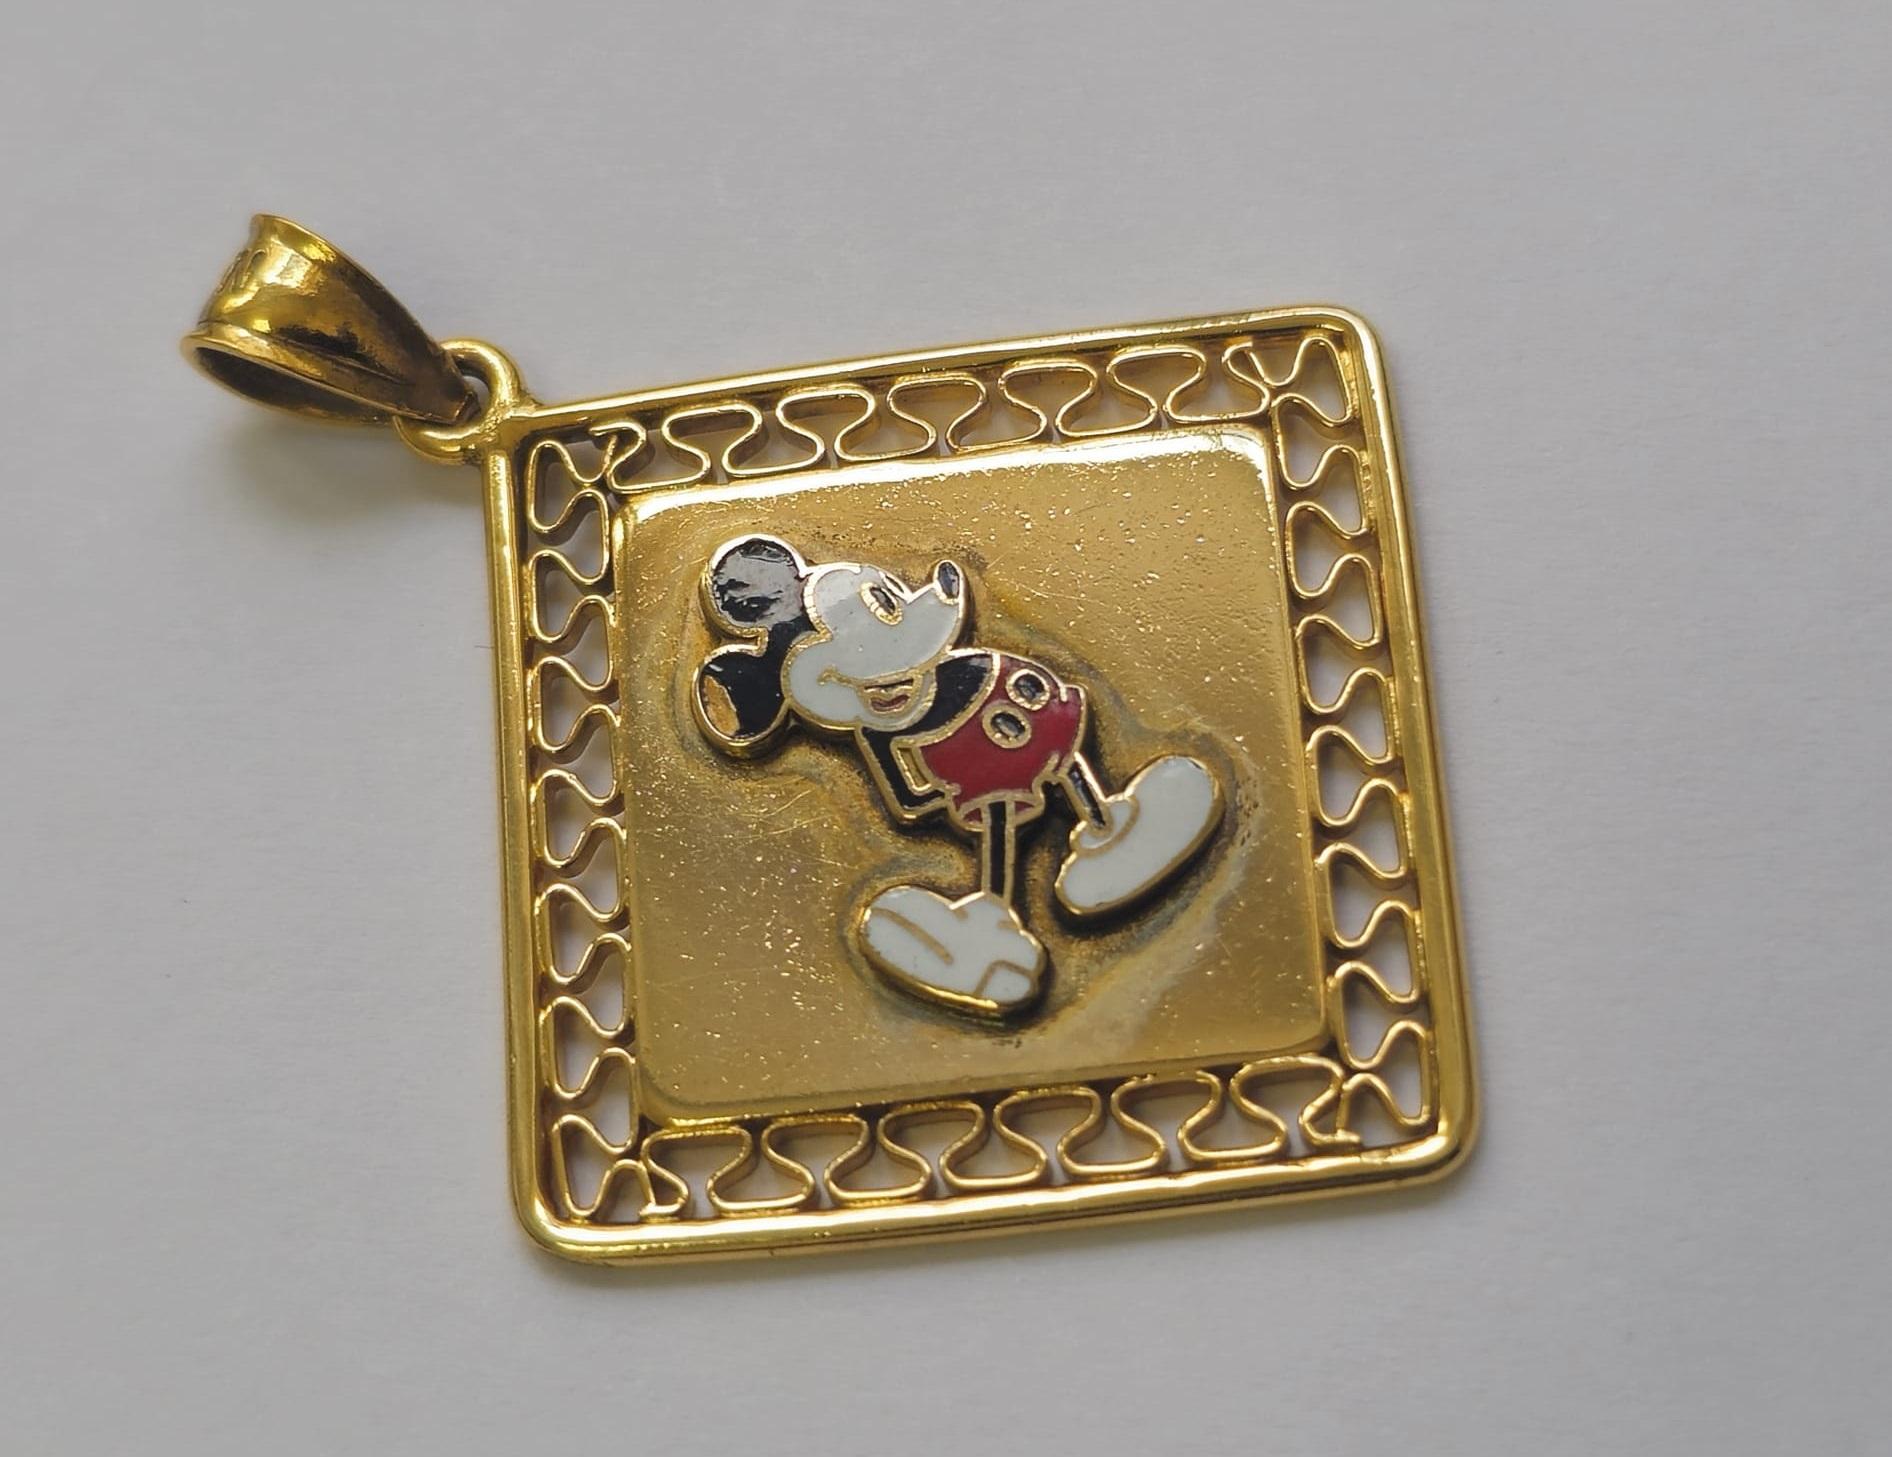 This vintage 14k gold Mickey Mouse pendant, weighing 9.3 grams, features a charming design measuring 1.75 x 1.4 inches. It's in good condition, showcasing classic craftsmanship and style. Perfect for Disney enthusiasts, this pendant adds a touch of